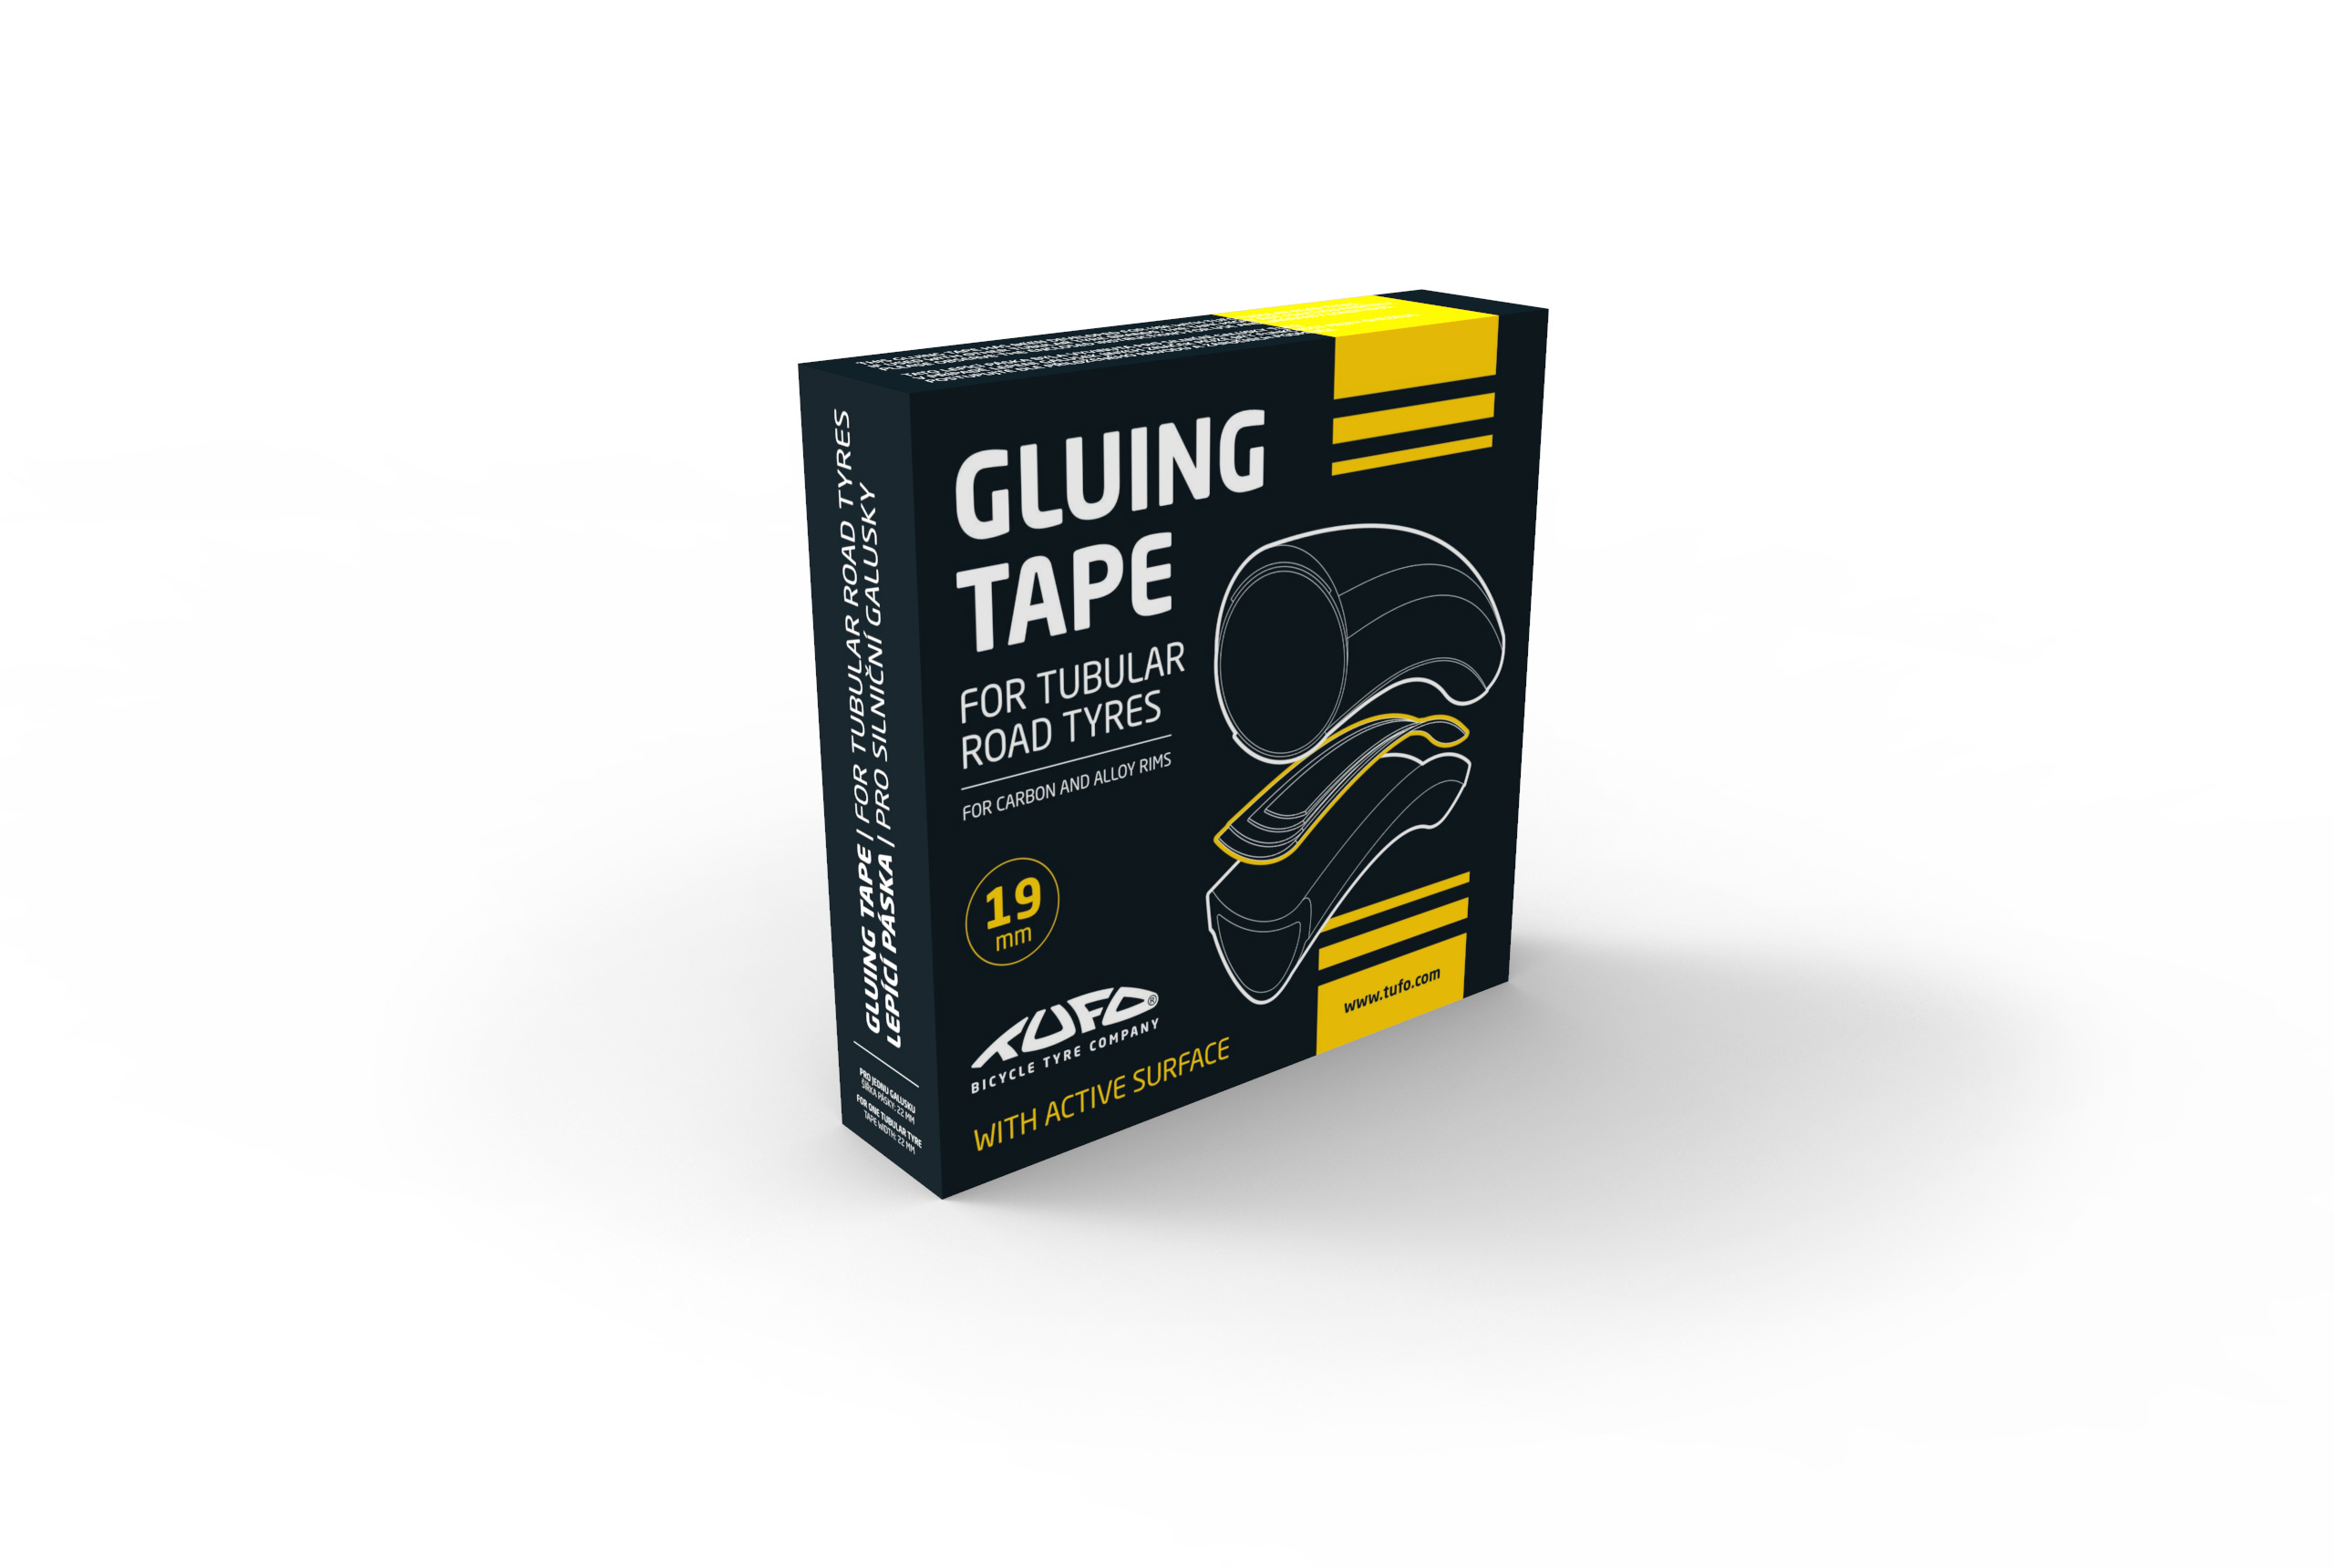 Details about   Tufo Gluing Tape for Tubular Road Tires 